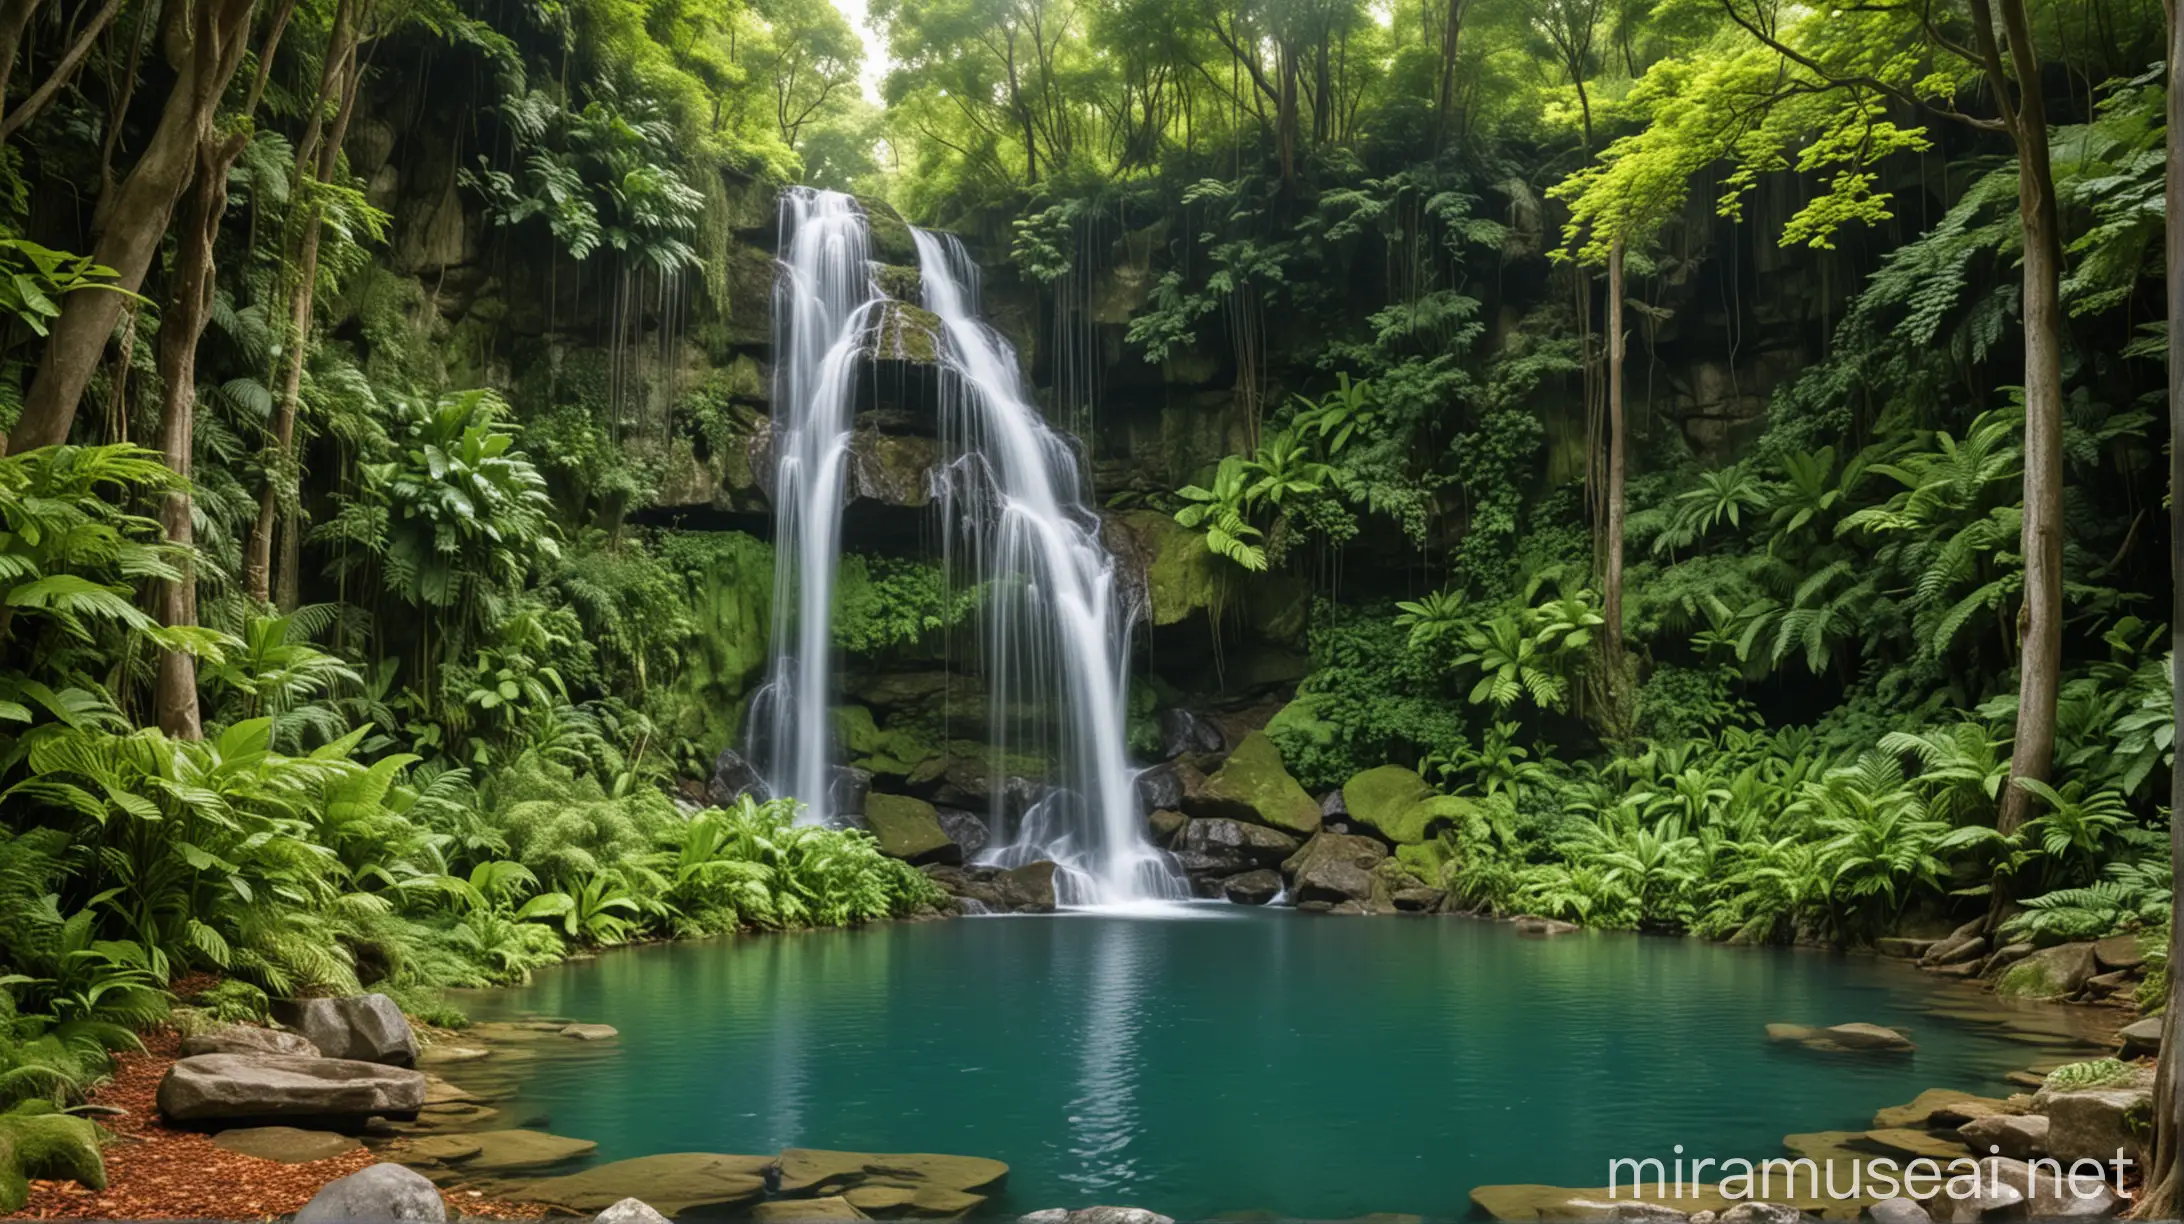 A stunning waterfall cascading down lush green cliffs in a serene forest. Surrounded by vibrant foliage and tall trees, the water flows into a clear, tranquil pool below, creating a picturesque and tranquil natural scene that exudes peace and beauty